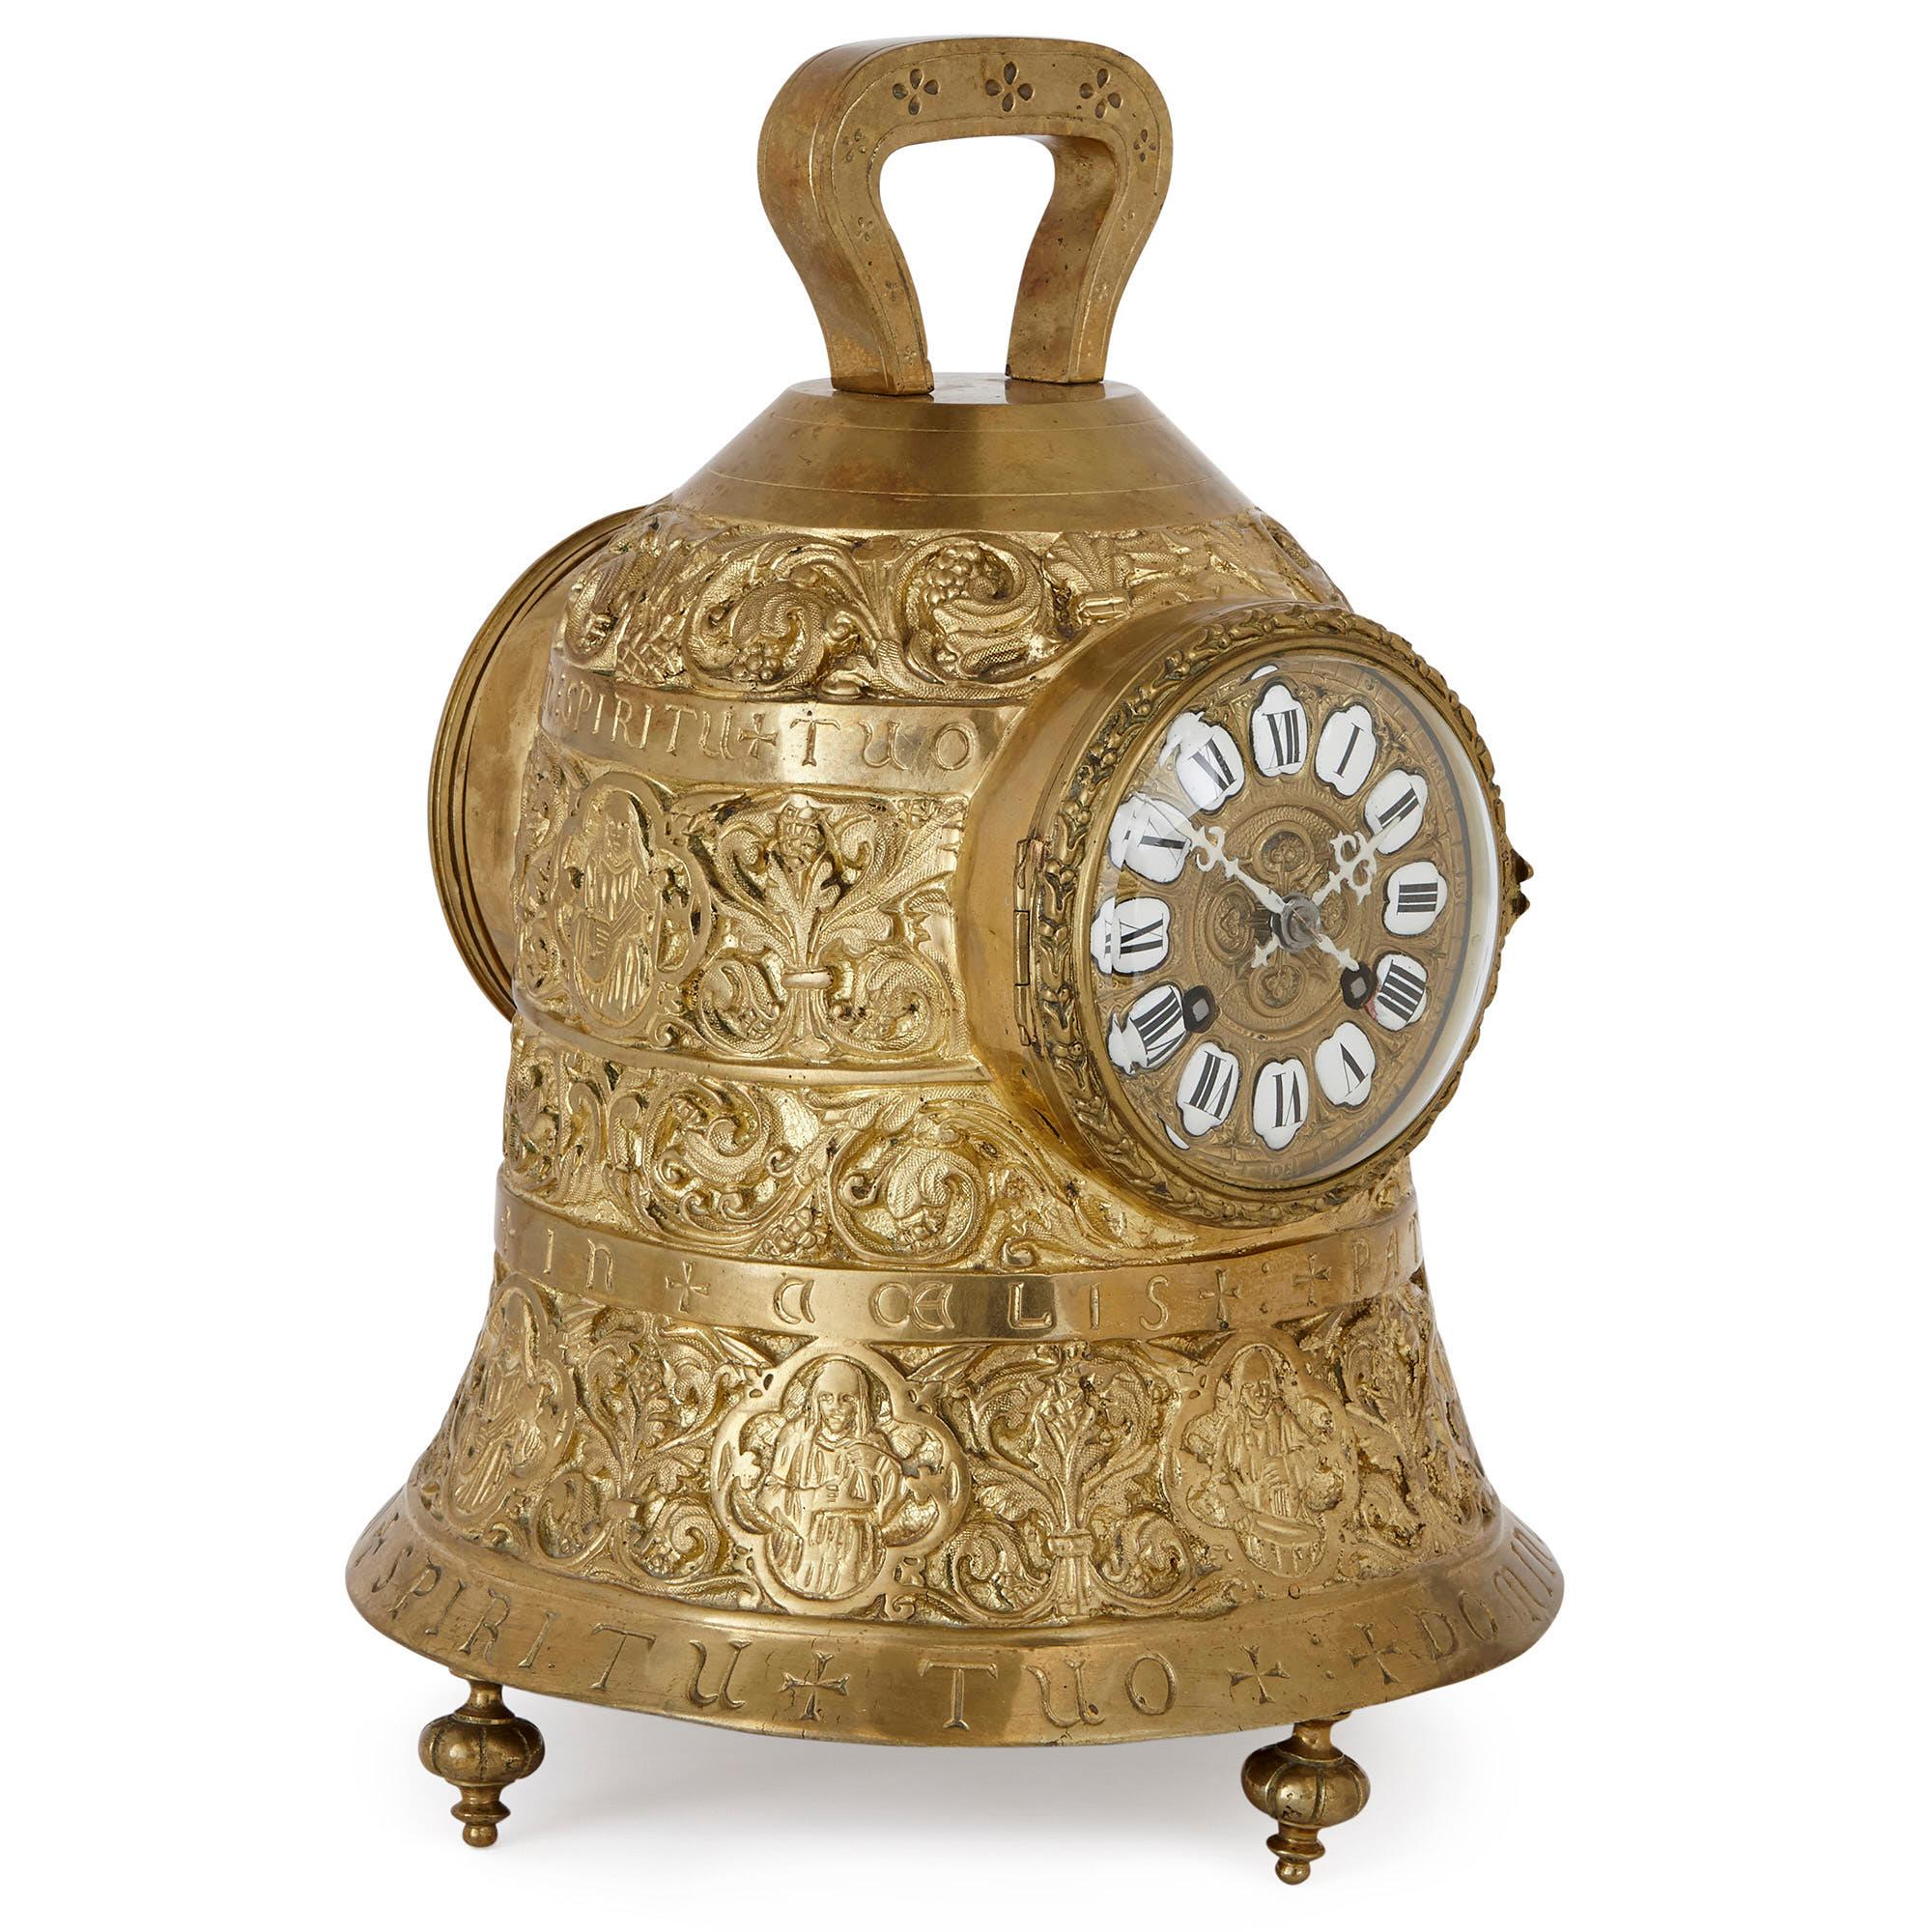 This three-piece brass clock set is wonderfully designed to look like a collection of Christian church bells. The mantel clock features a bell-shaped body which is set on four turnip feet. The clock’s body is decorated with stylised scrolling vines